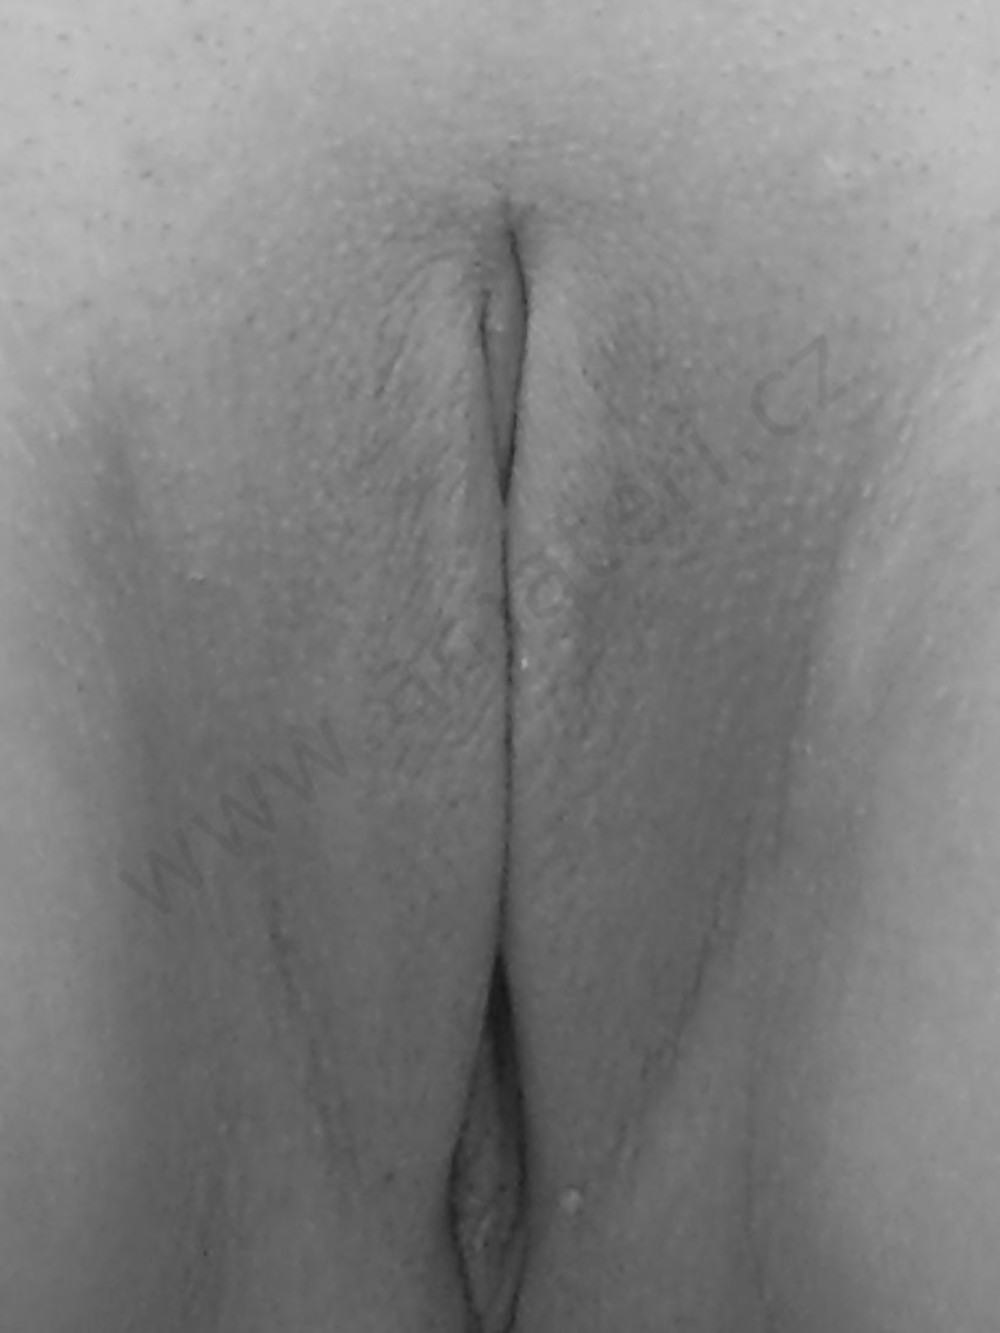 Black and white pussy closeups adult photos